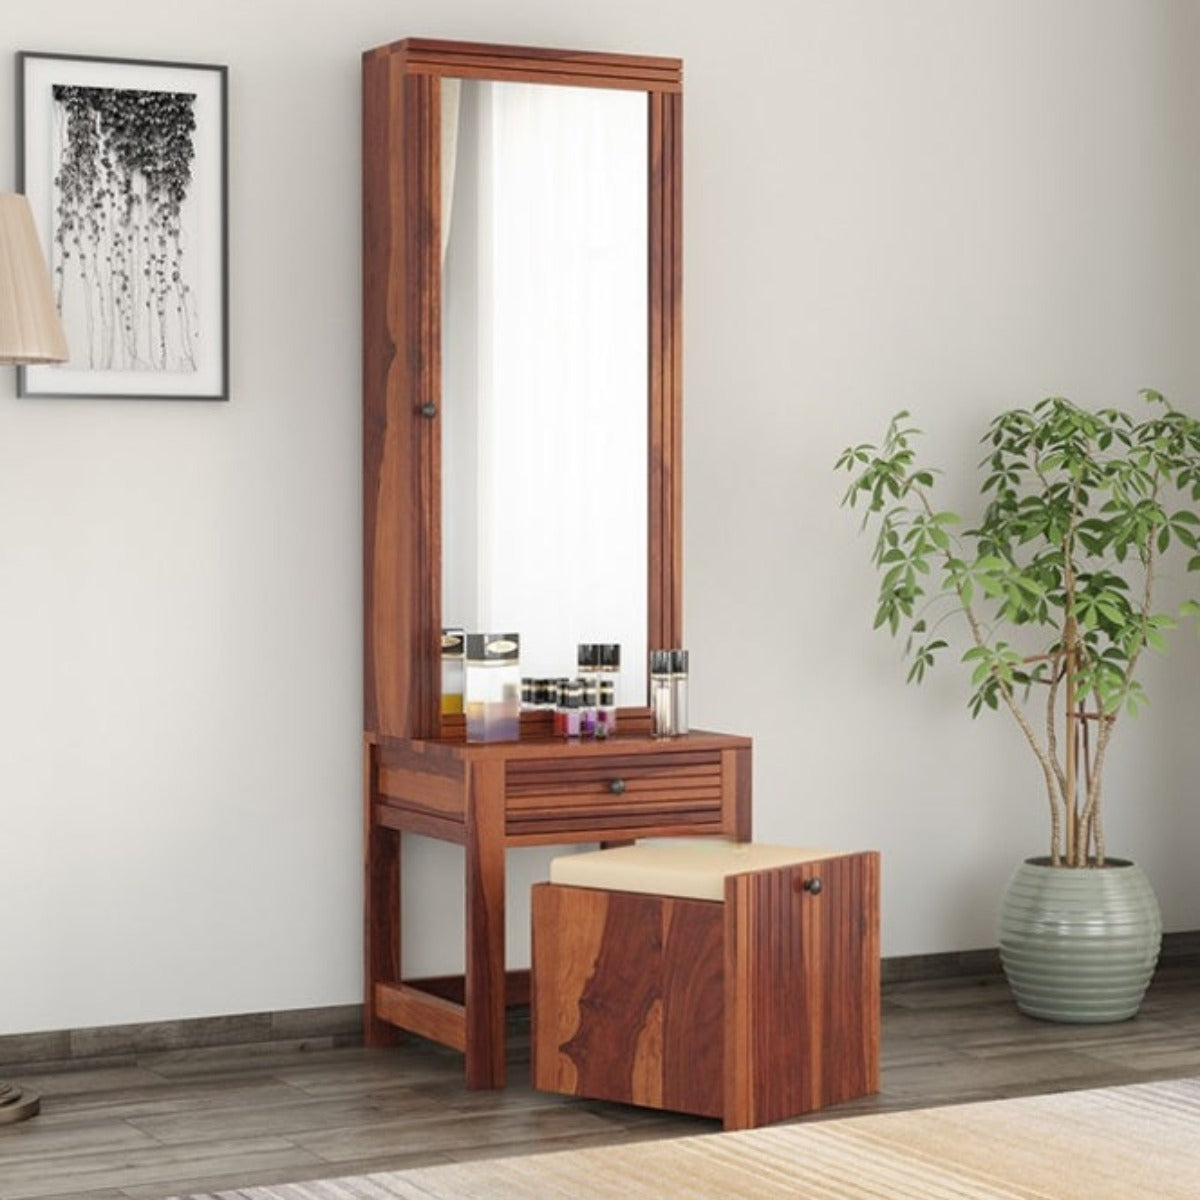 20 Modern Dressing Table Designs Available In 2023 | Dressing table design,  Modern dressing table designs, Dressing room design